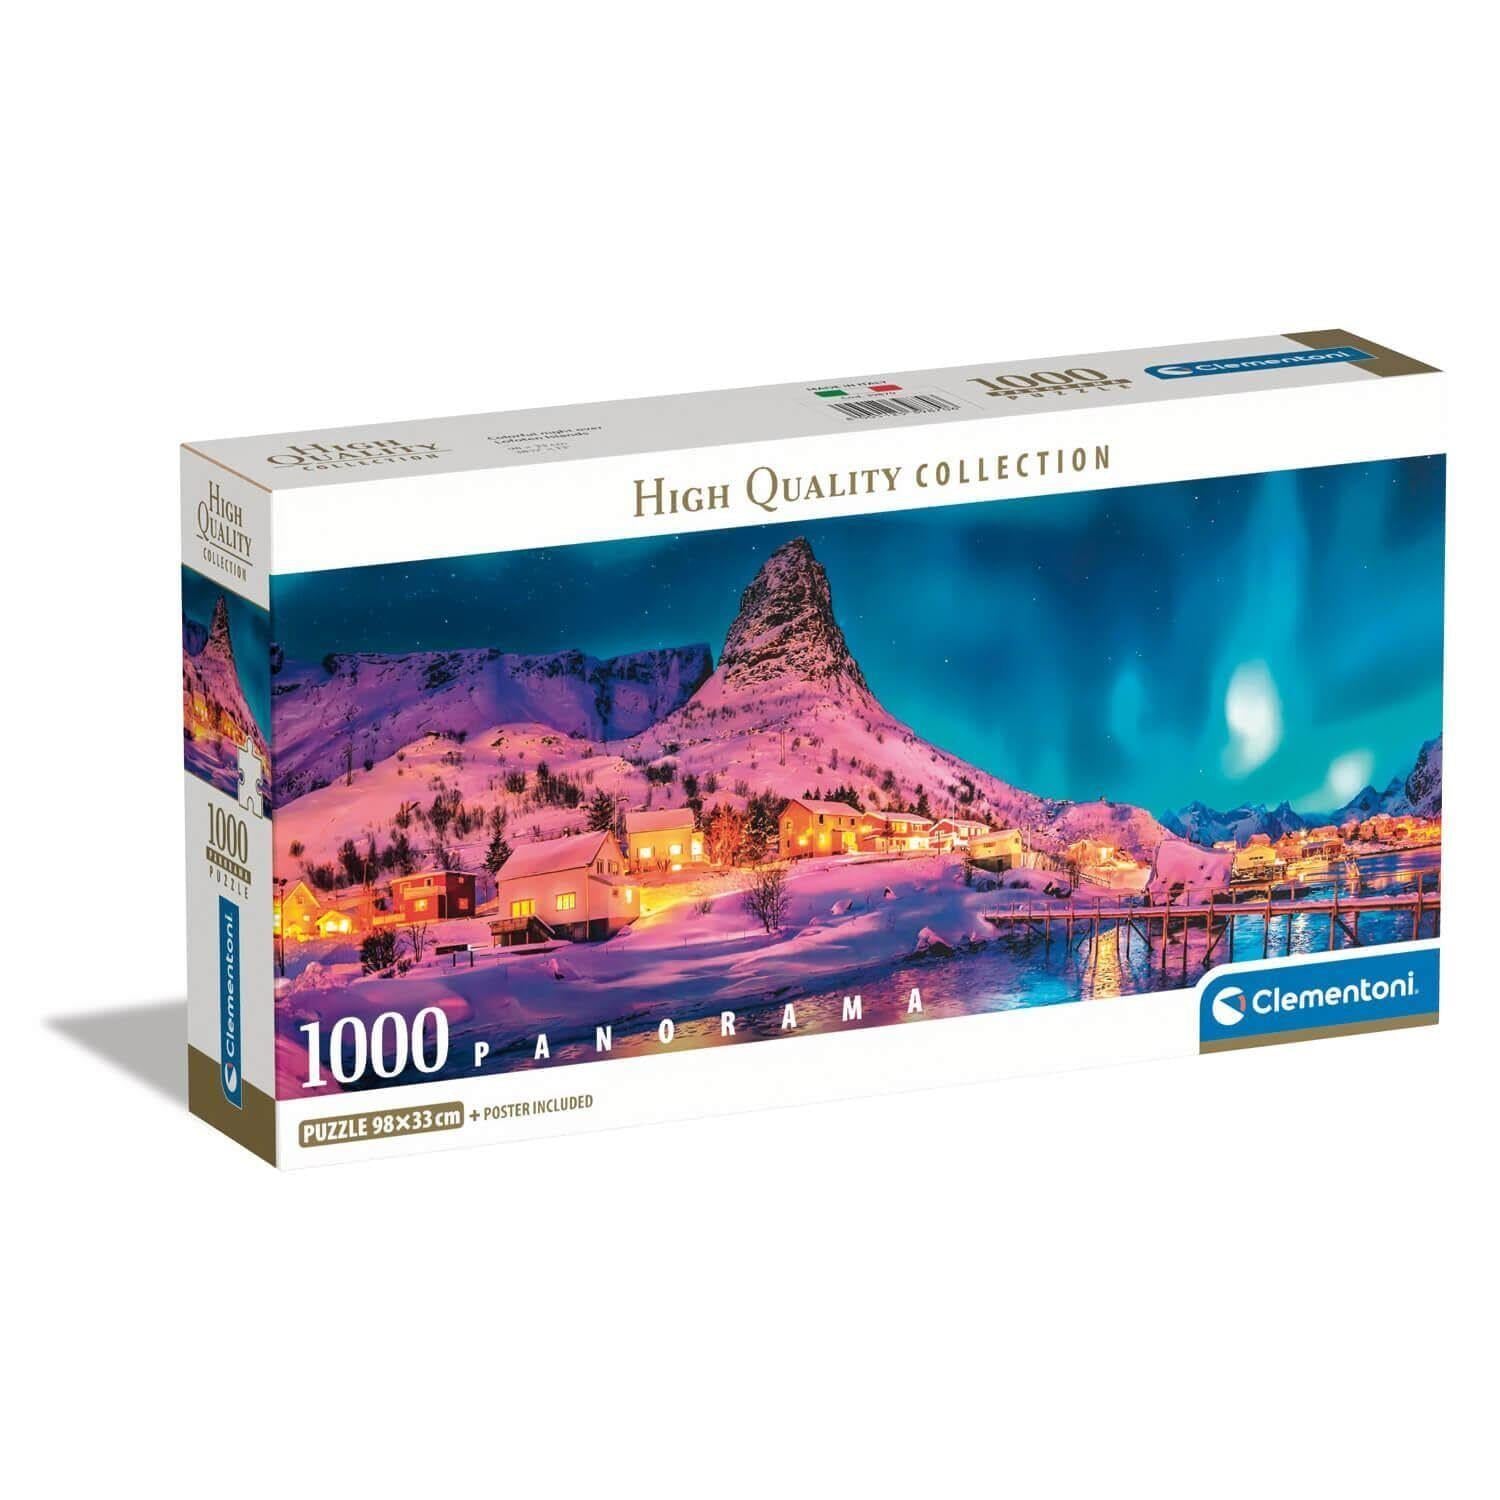 Clementoni Colourful Night Over Lofoten Islands Panorama Jigsaw Puzzle (1000 Pieces)